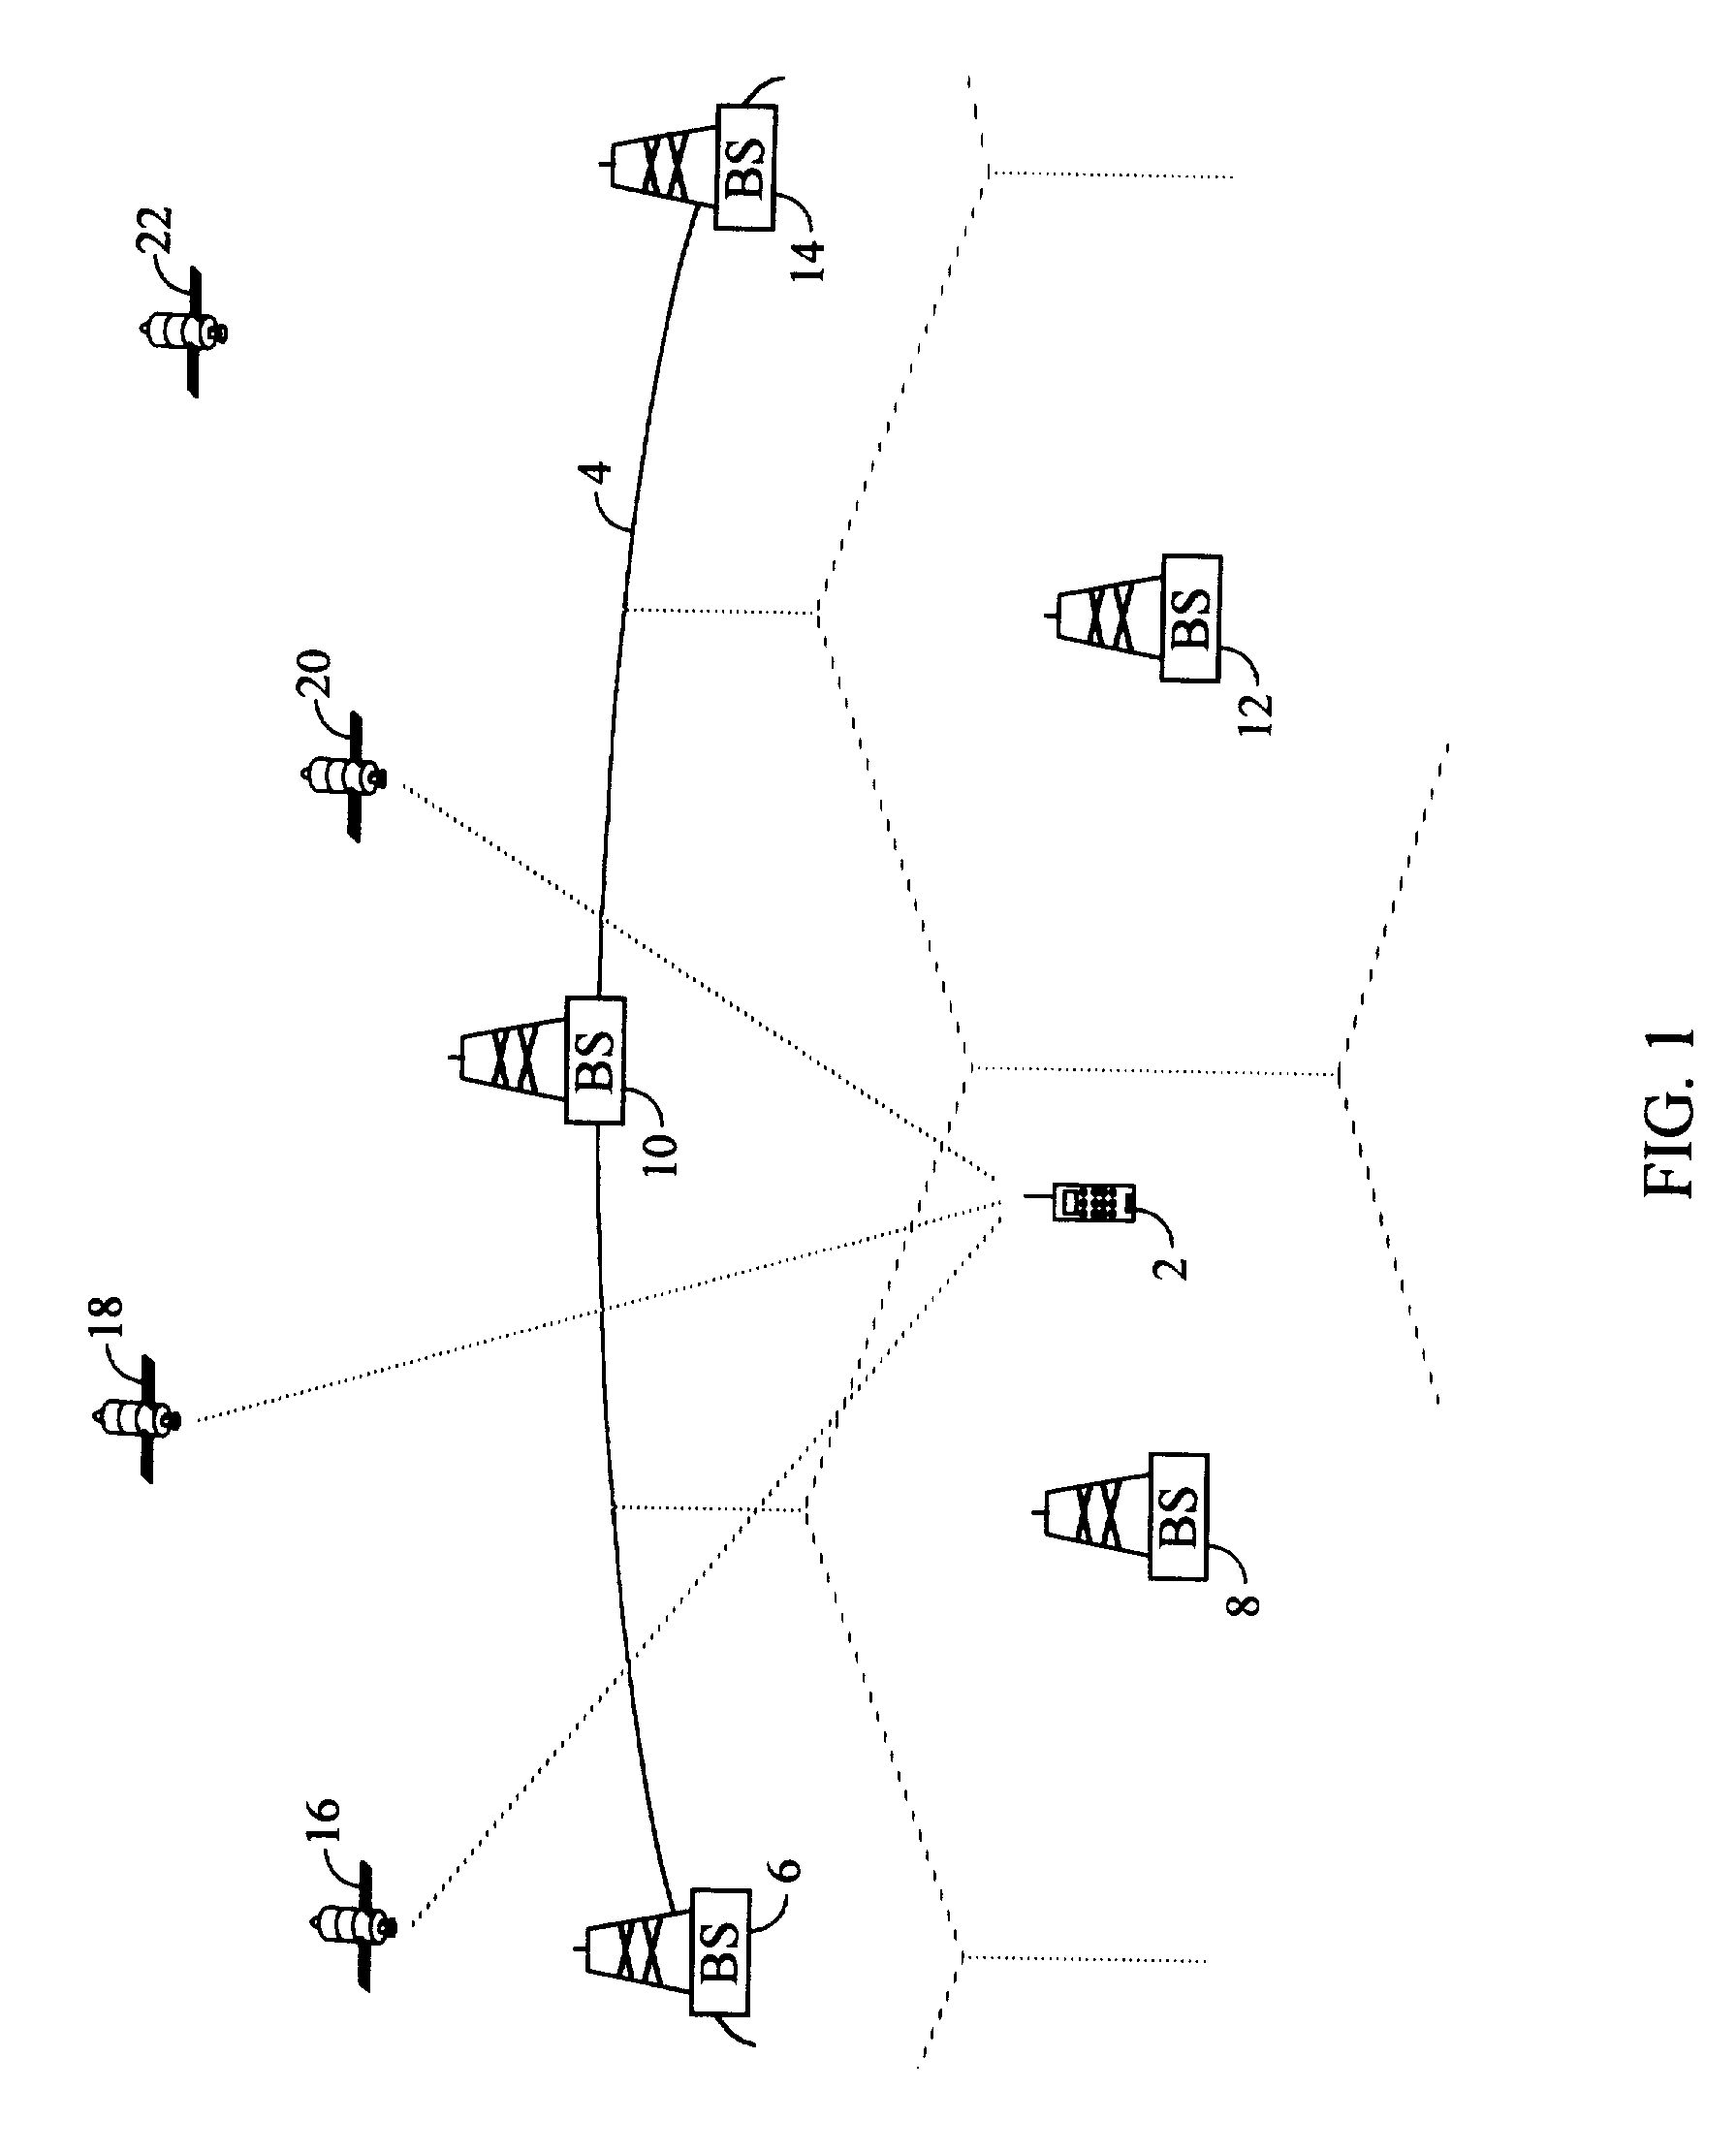 GPS satellite signal acquisition assistance system and method in a wireless communications network